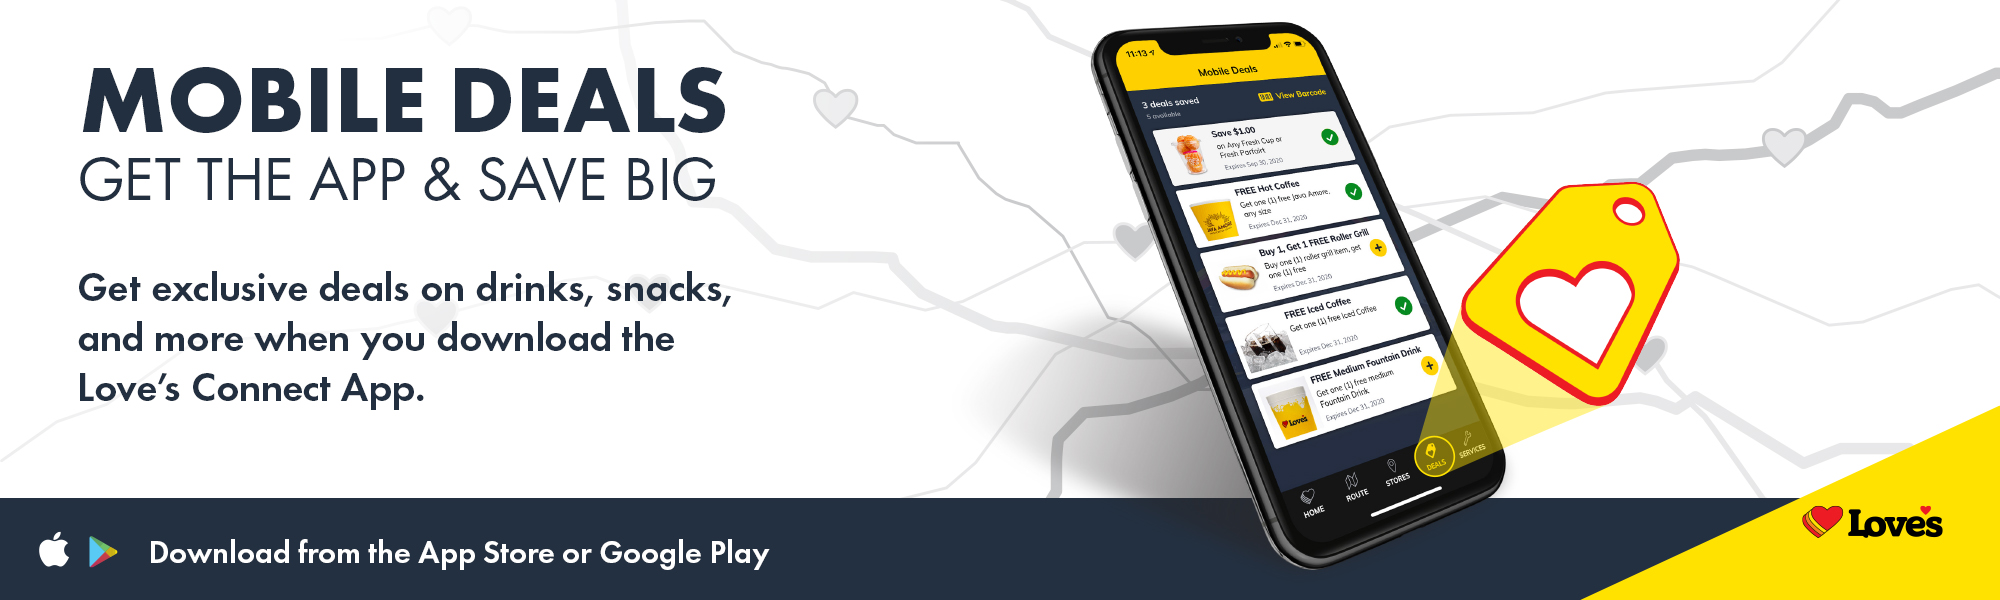 Mobile deals now available on the Love's Connect App